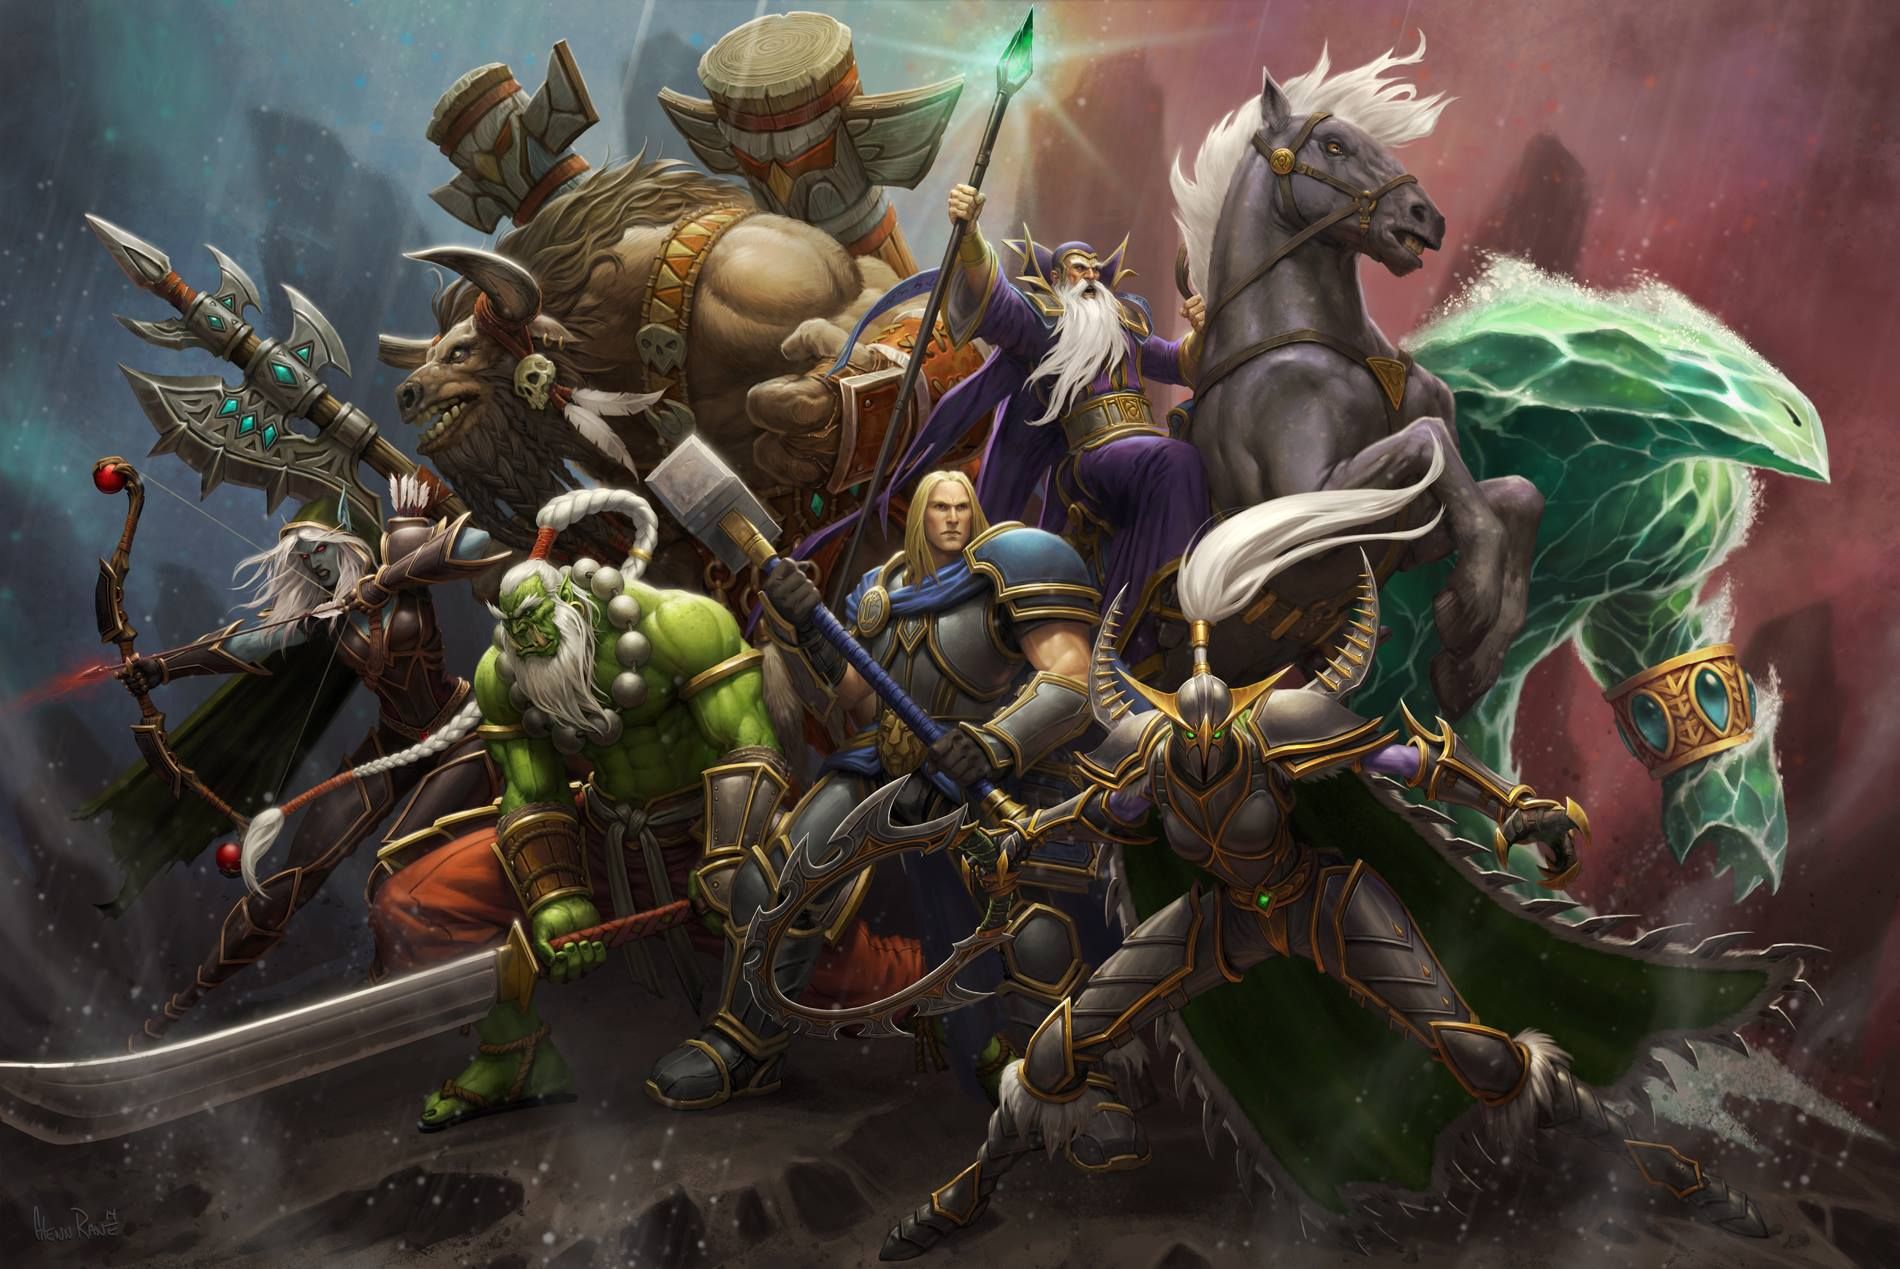 First World Of Warcraft poster unveiled pits Horde vs Alliance